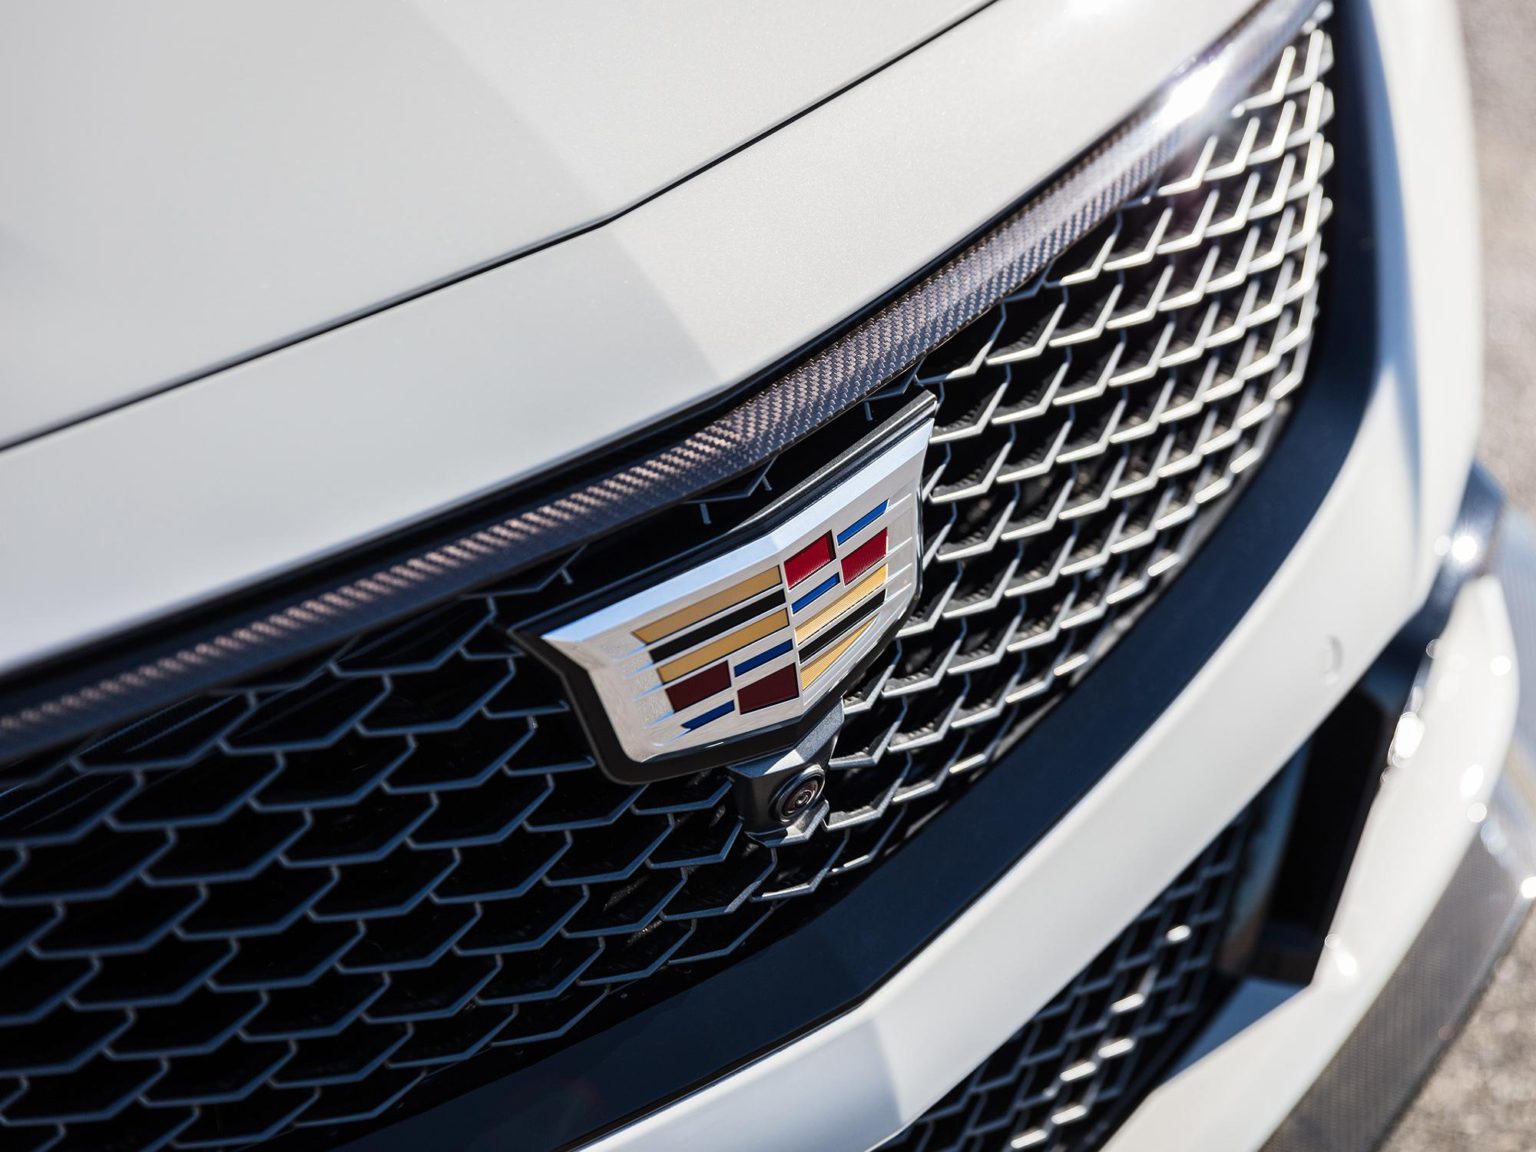 The 2022 Cadillac CT5-V Blackwing and 2022 Cadillac CT4-V Blackwing were introduced earlier this year.